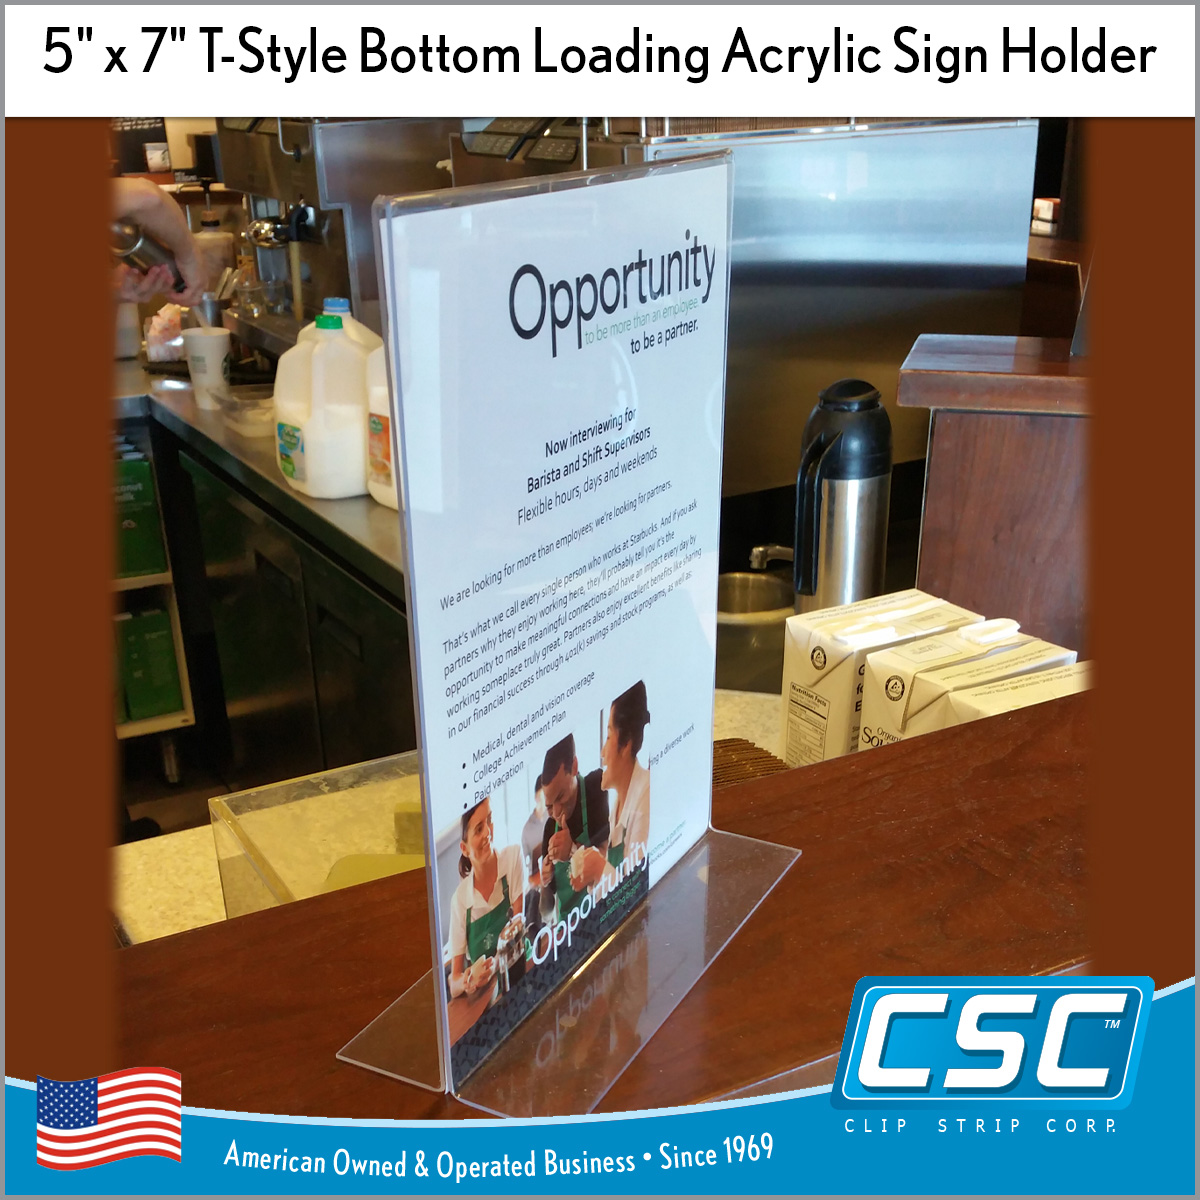 7” x 5” Table Top Sign Holder